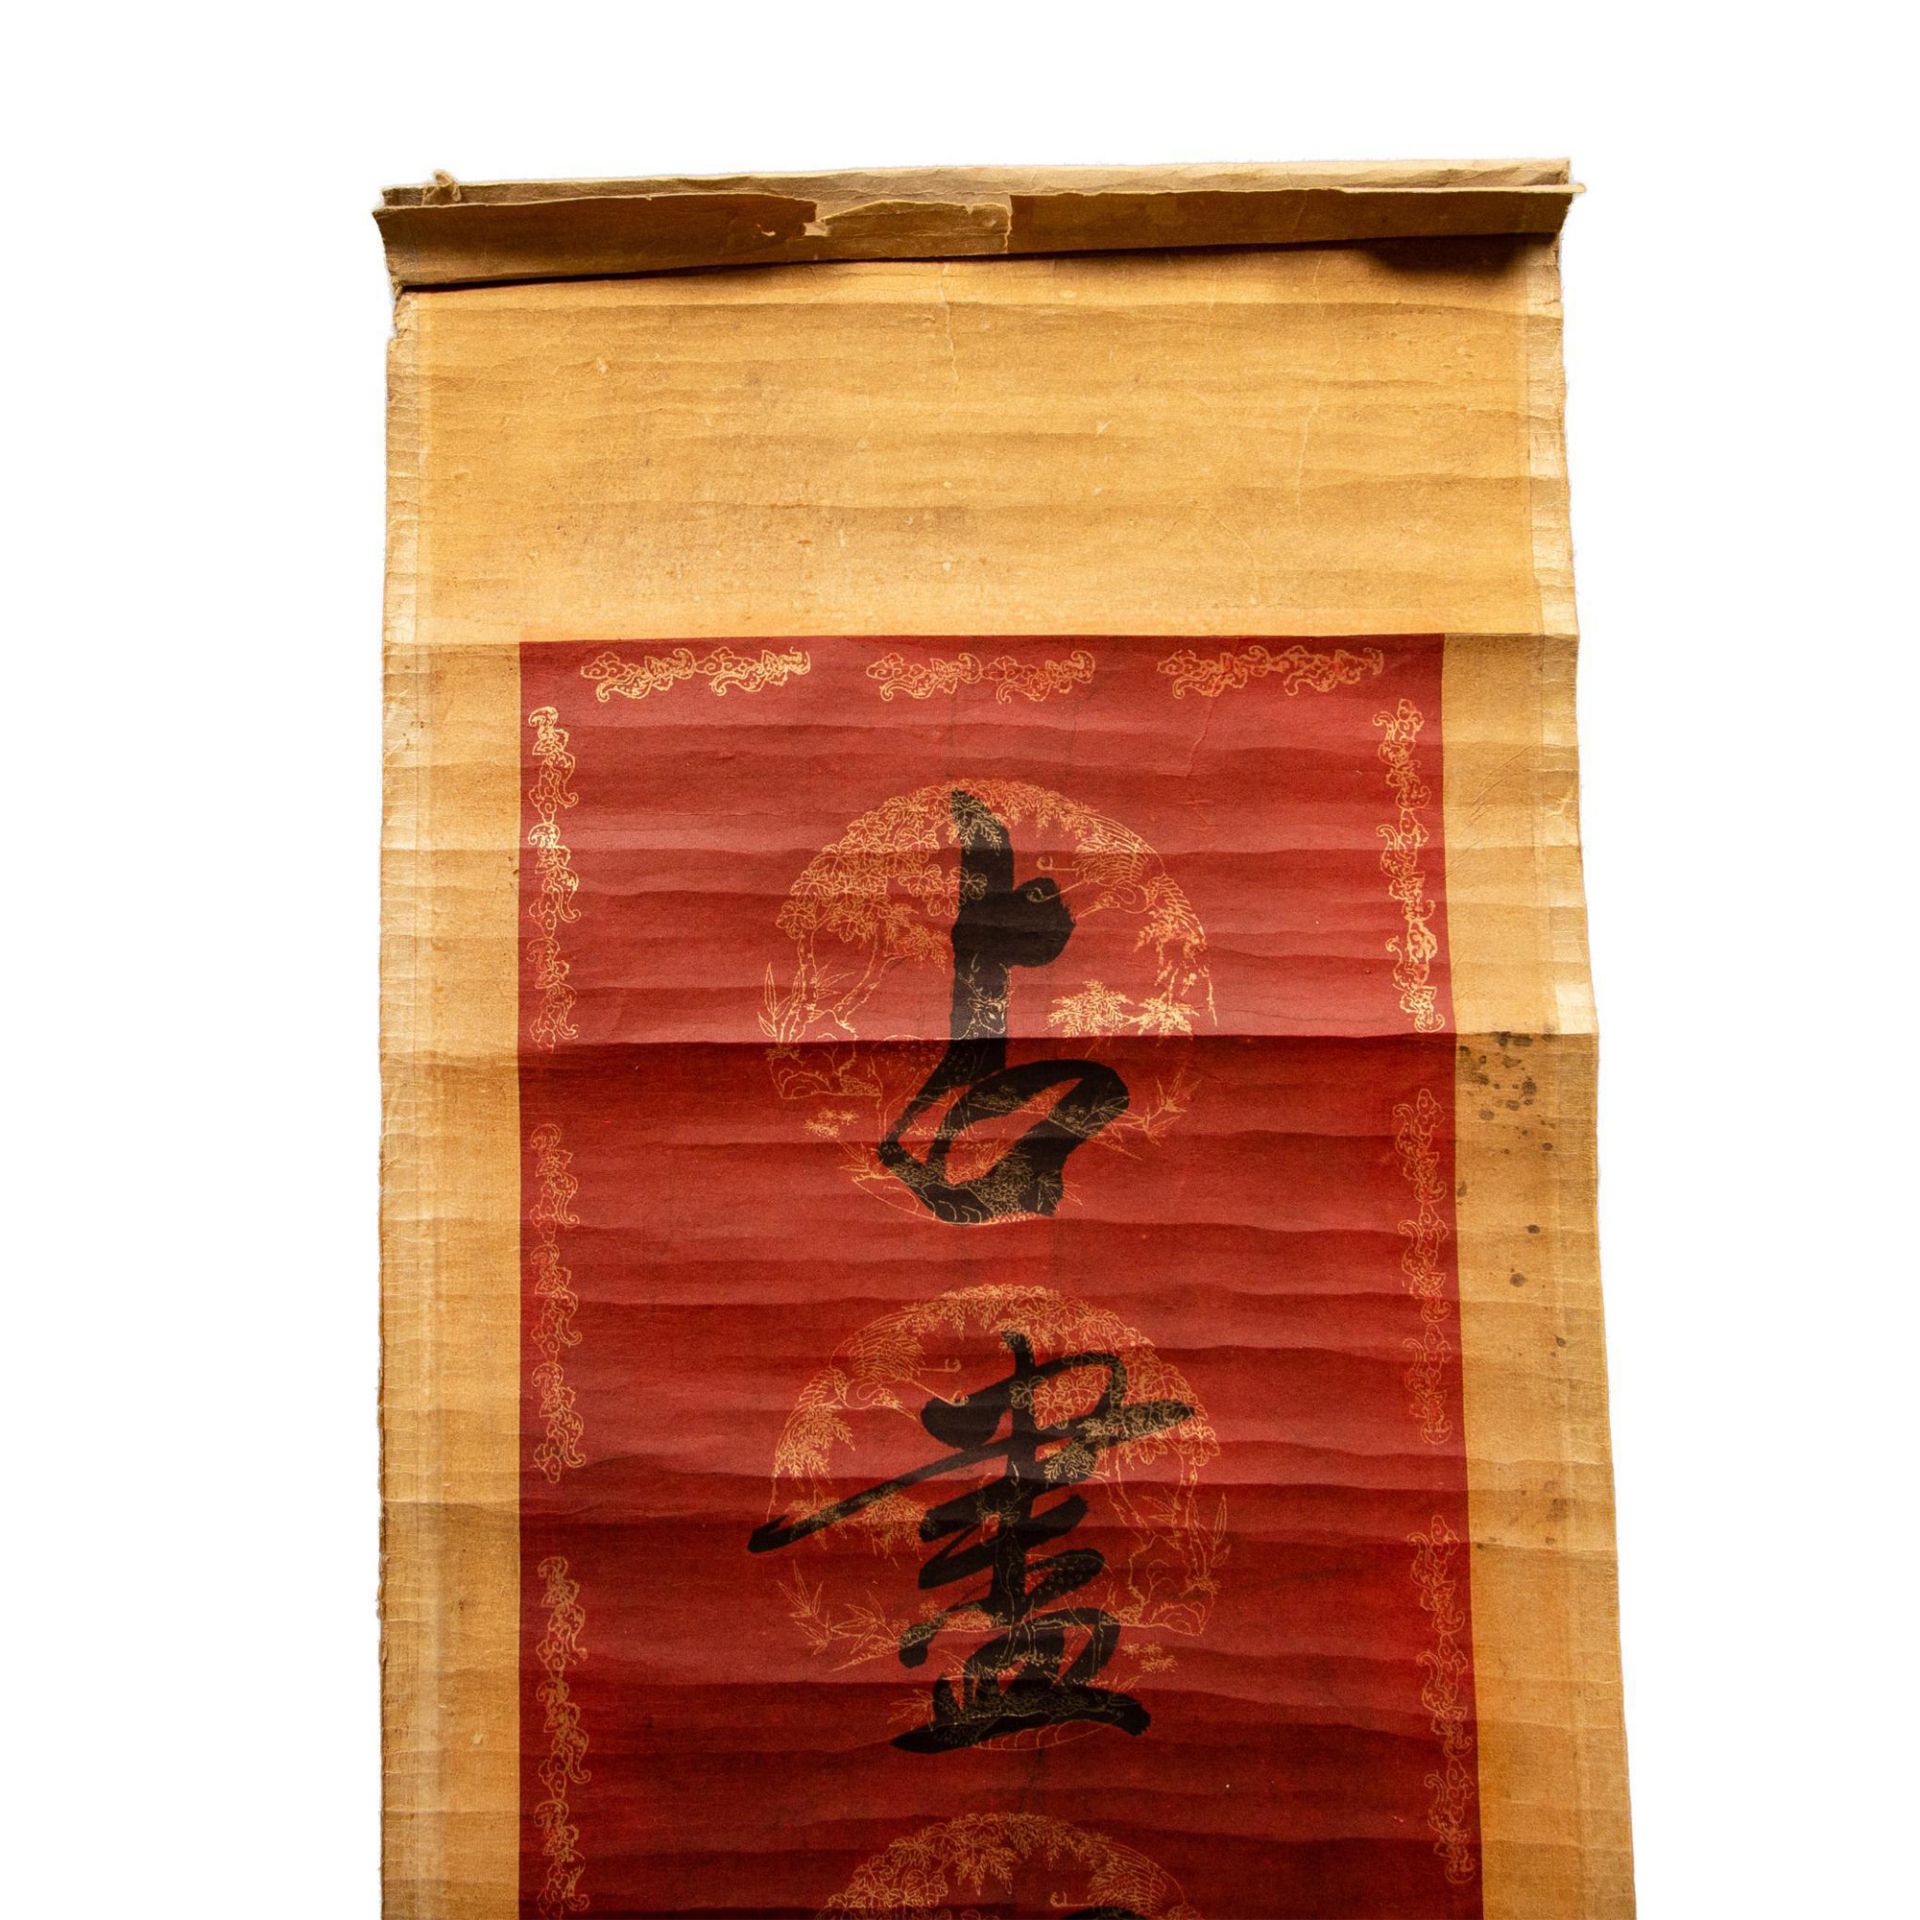 Antique Chinese Gilded Painted Paper and Silk Scroll - Image 4 of 6